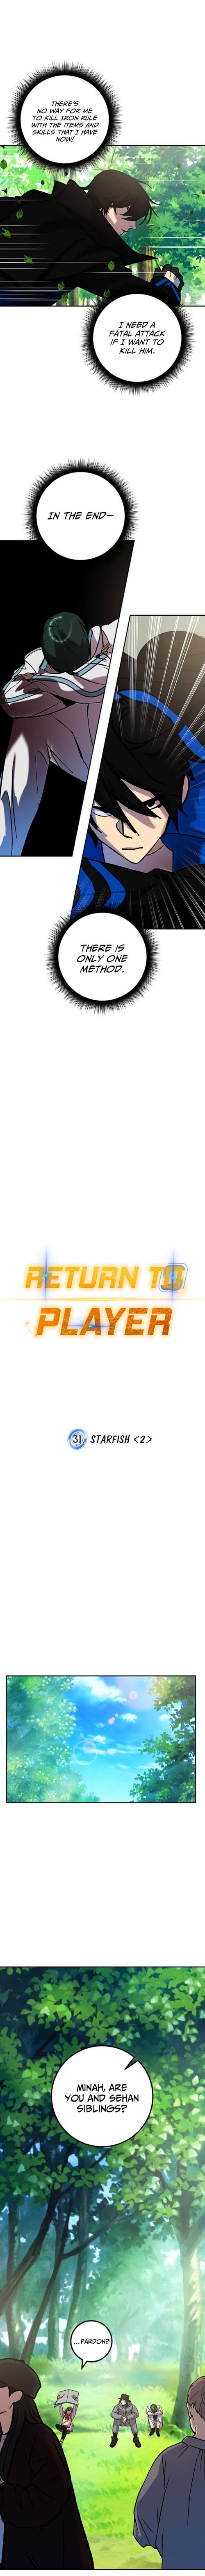 return to player chapter